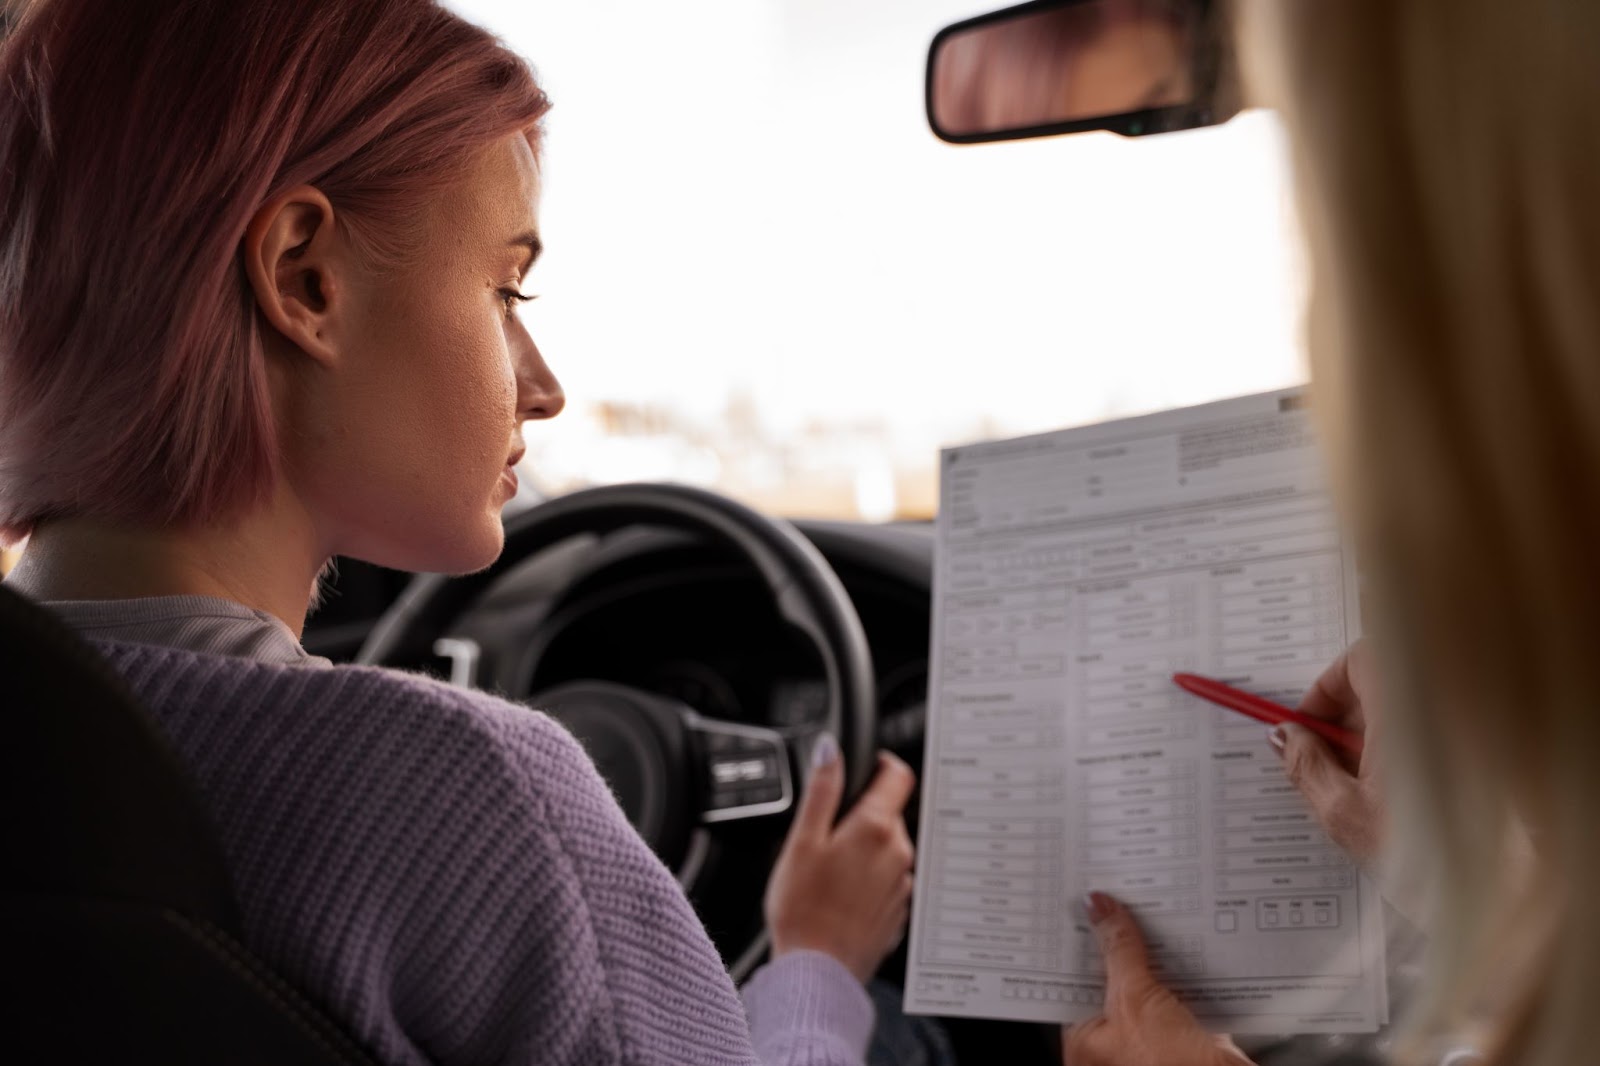 A international student taking driving test